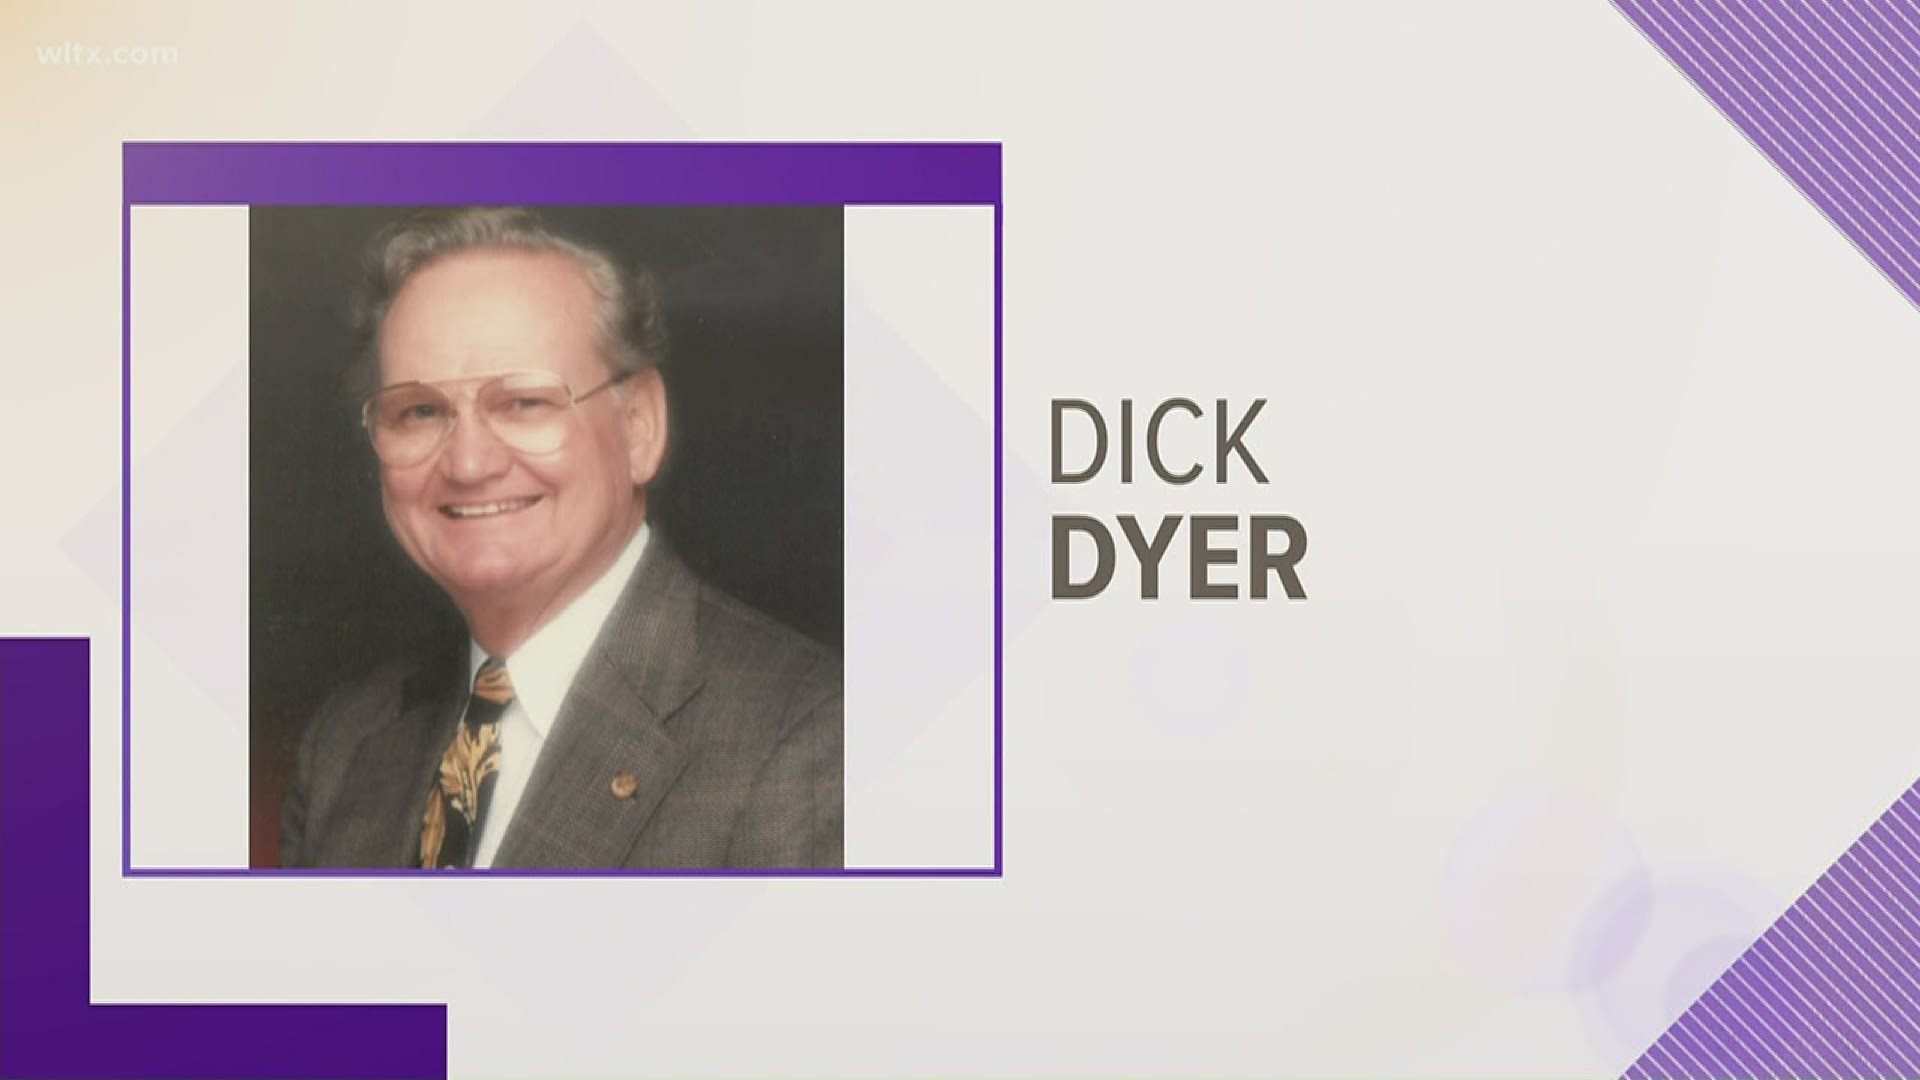 Dick Dyer, a car dealer in the Midlands since the early sixties passed away this weekend.